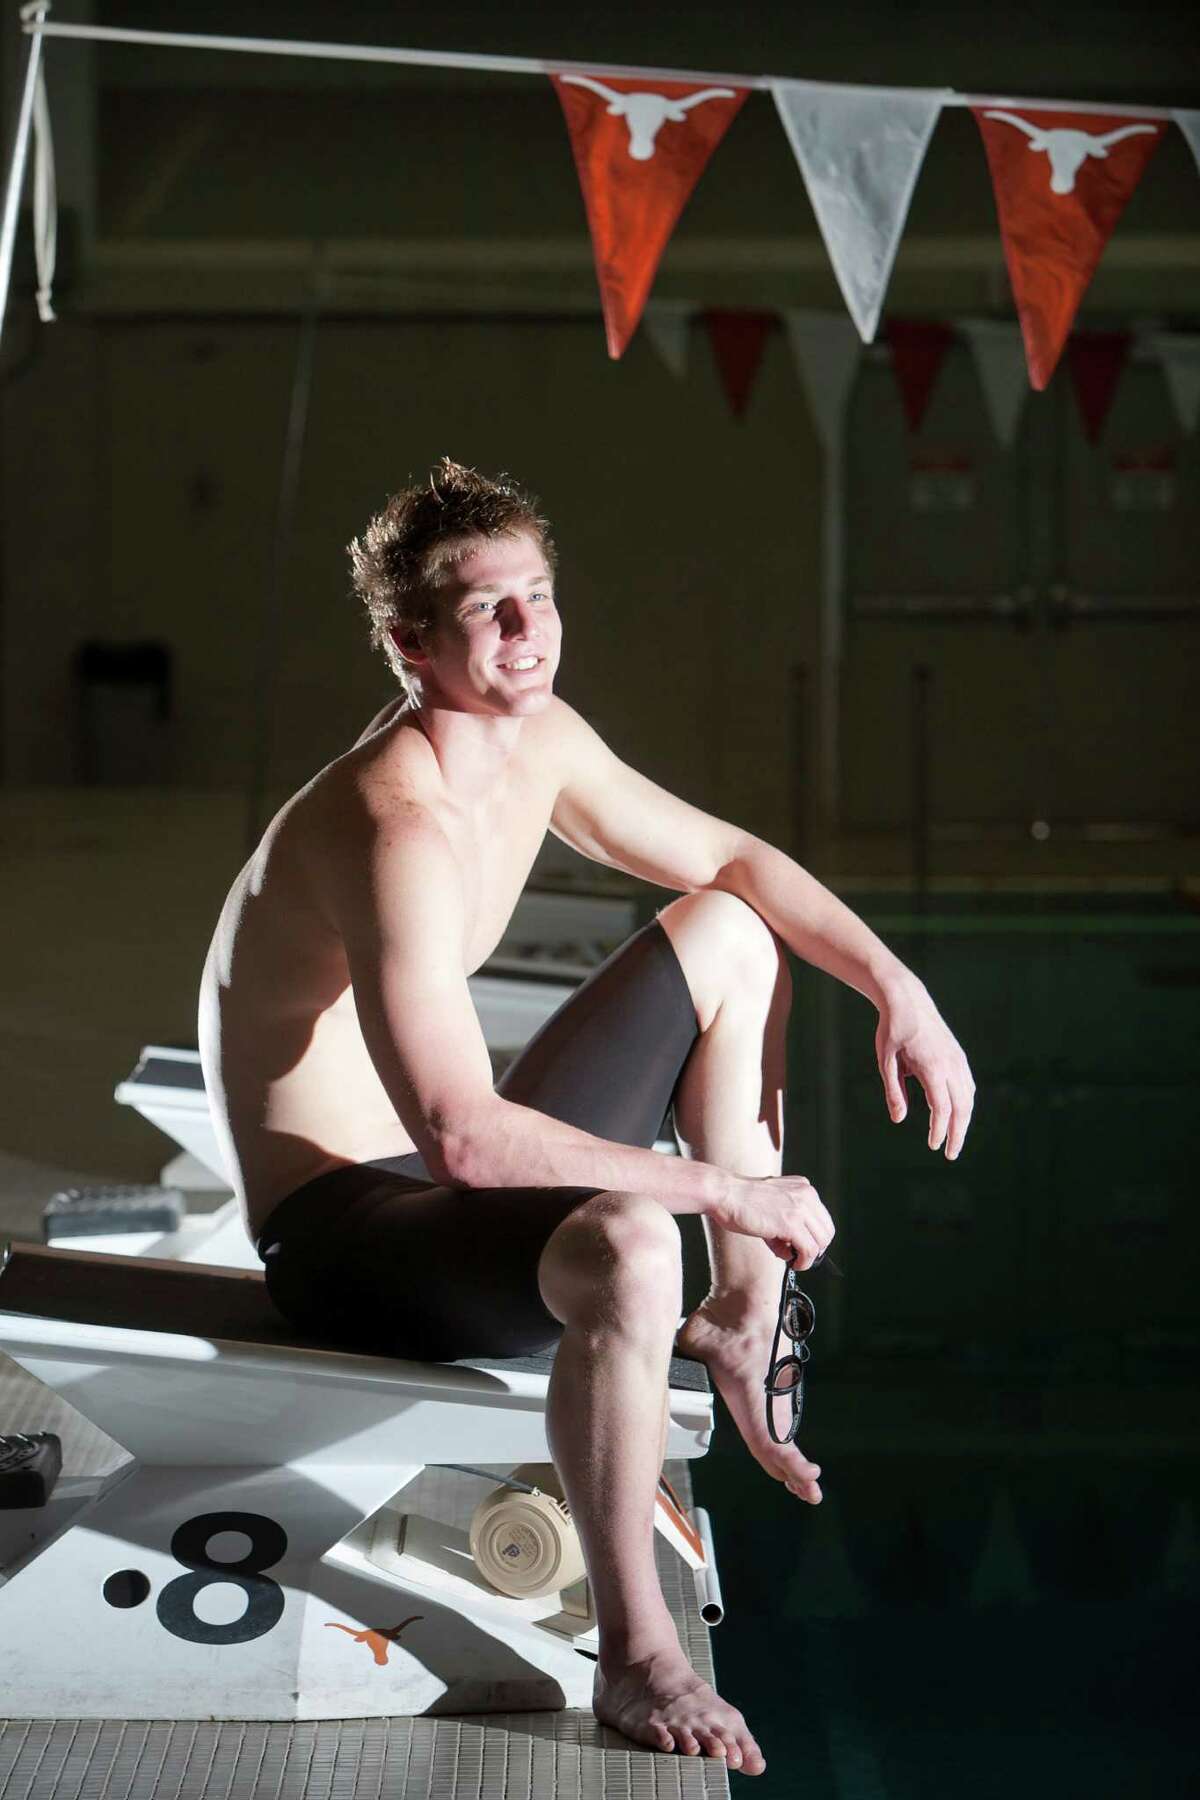 Jimmy Feigen of San Antonio finished his collegiate career at the University of Texas with three national championships in the 50 freestyle, 100 freestyle and 400 freestyle relay and was the Big 12's swimmer of the year, the first swimmer to earn that distinction four years in a row. Feigen is preparing for the U.S. Olympic trials and the Olympics in London this summer.